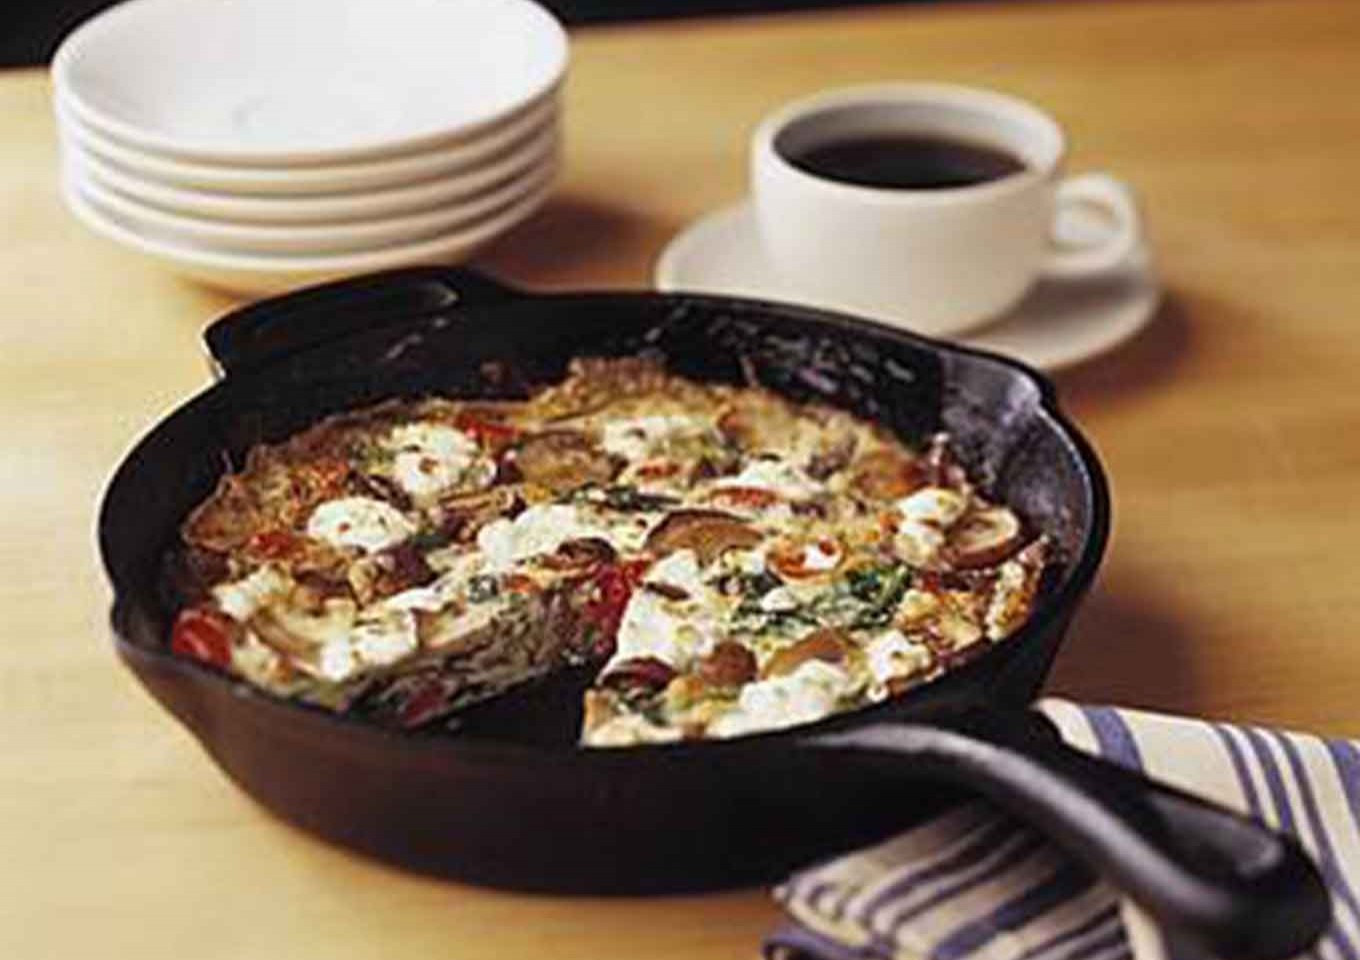 Mushroom, Spinach and Tomato Egg White Frittata with Goats Cheese